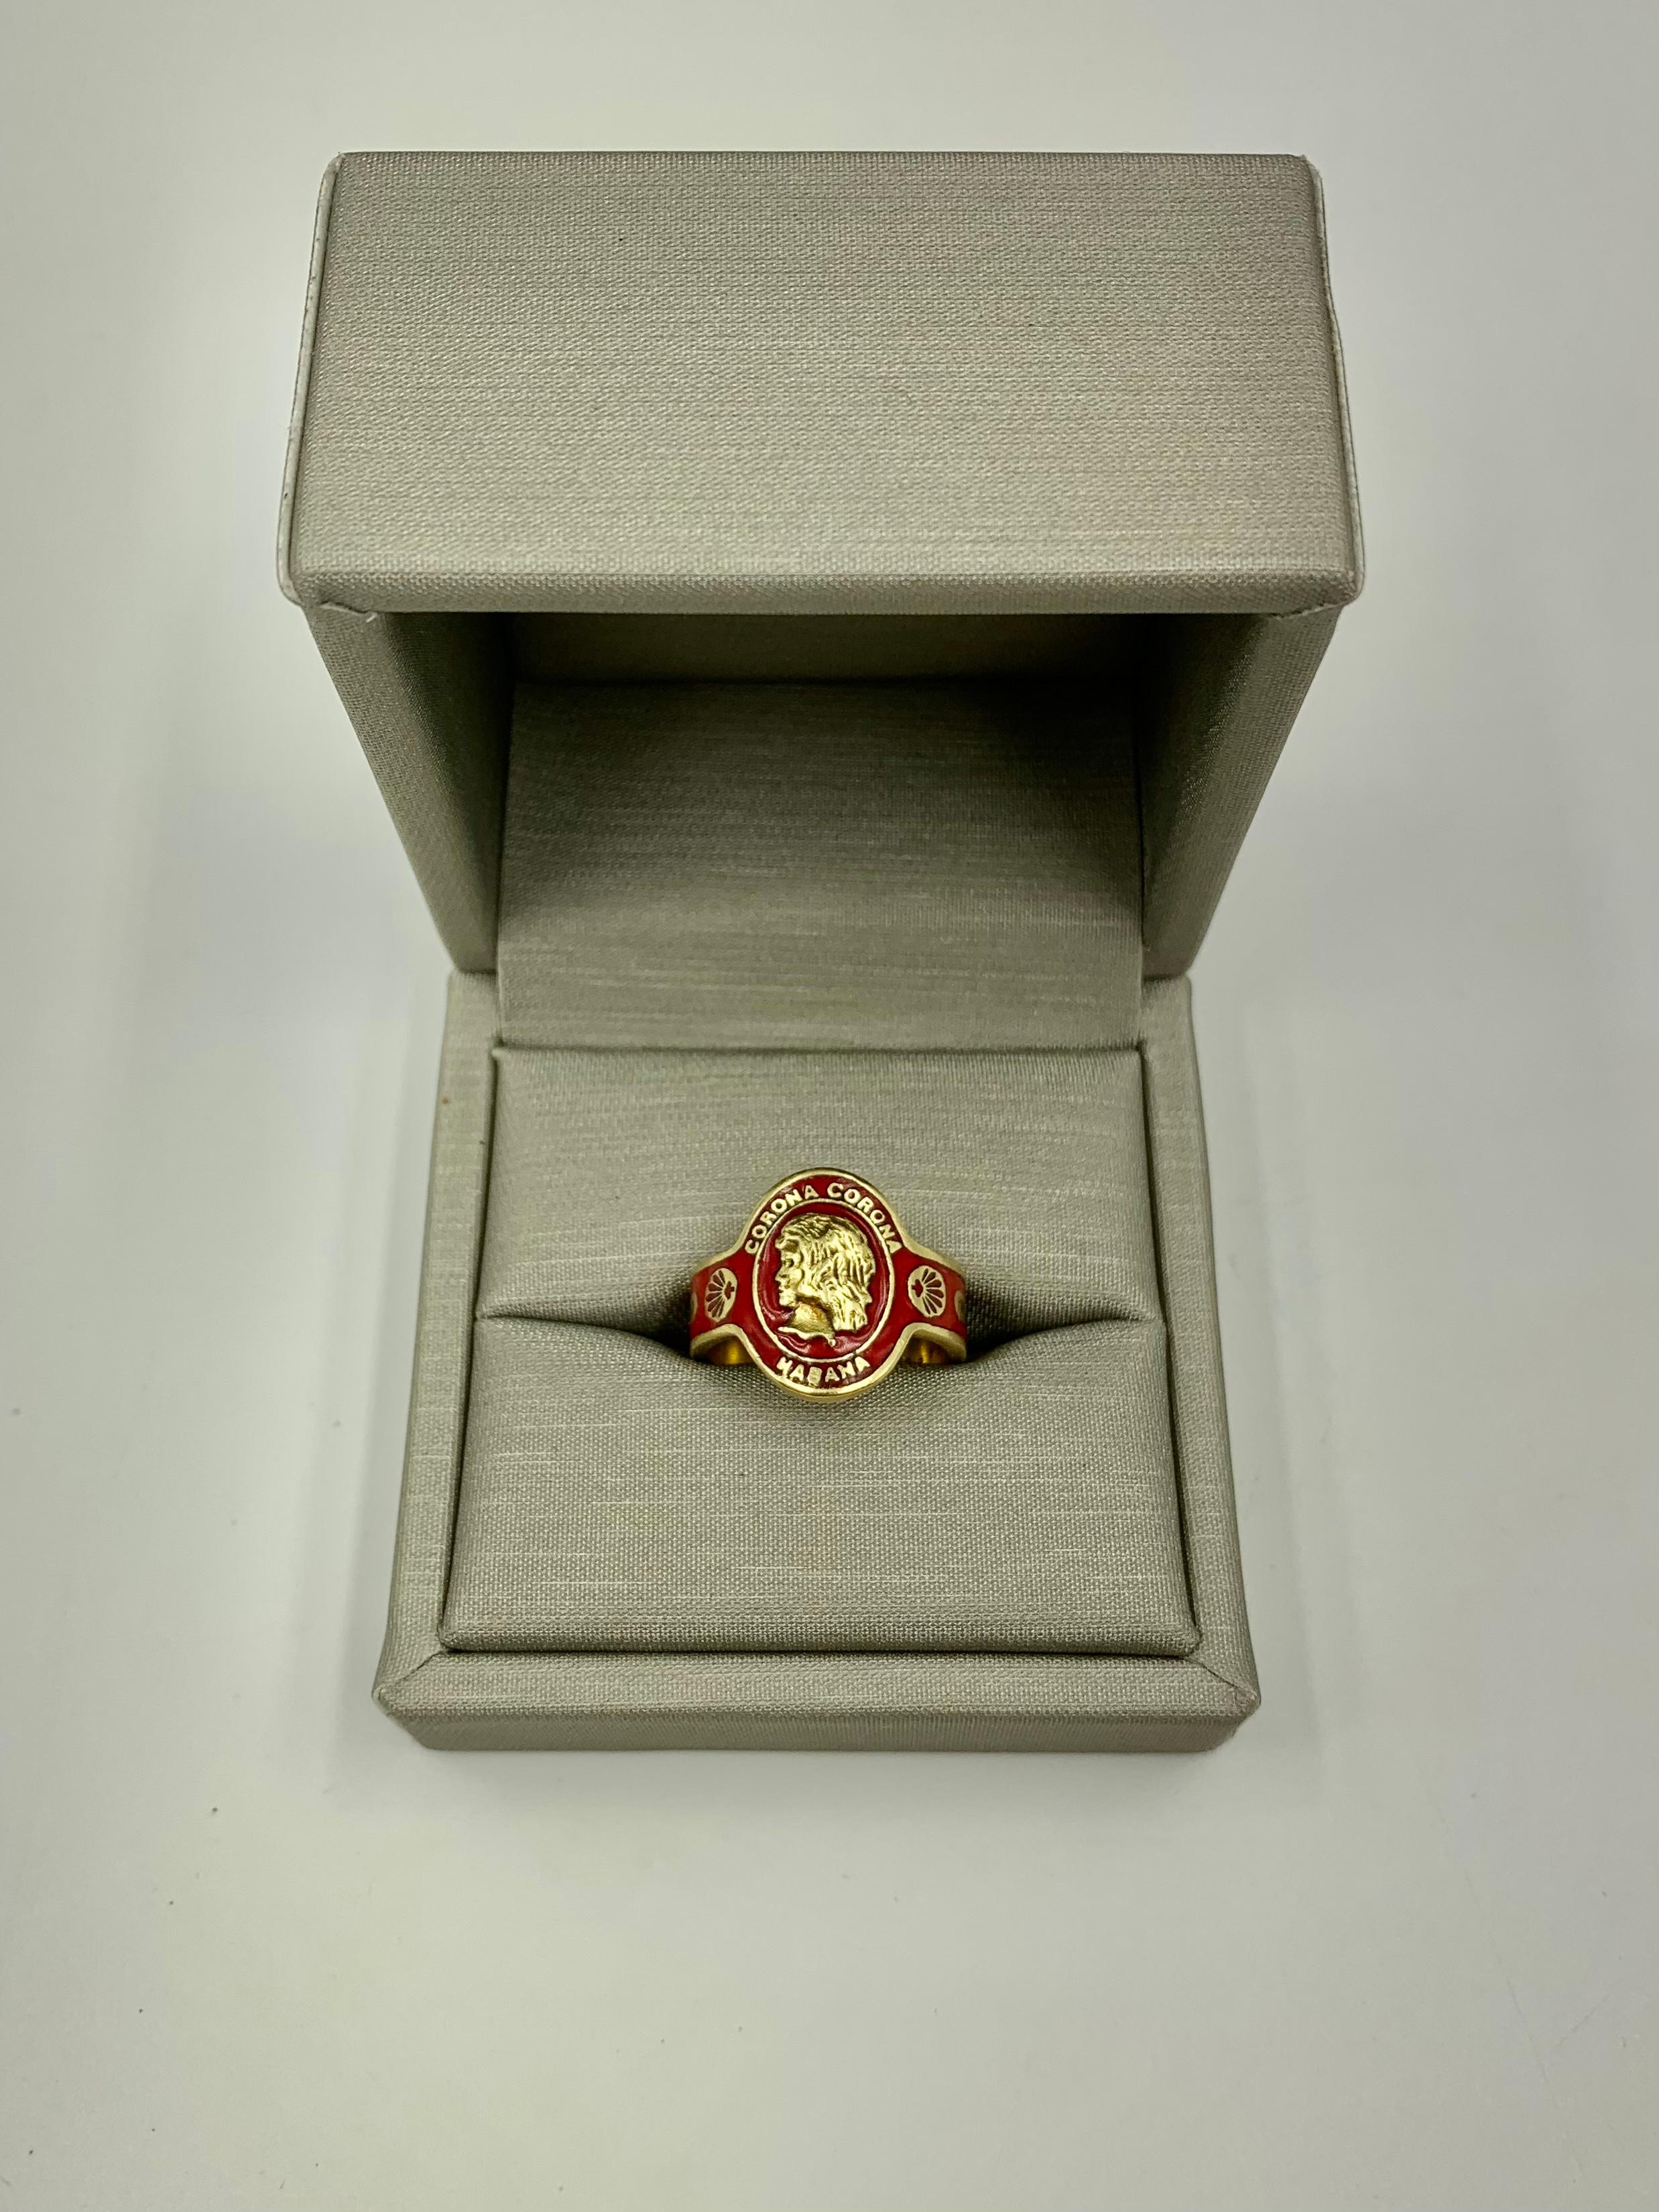 Classic, collectible Cartier red enamel 18K gold Corona Corona Habana cigar band ring.
Size 7US
Great condition
Marks: Cartier 18K, numbered on band
Circa 1970
